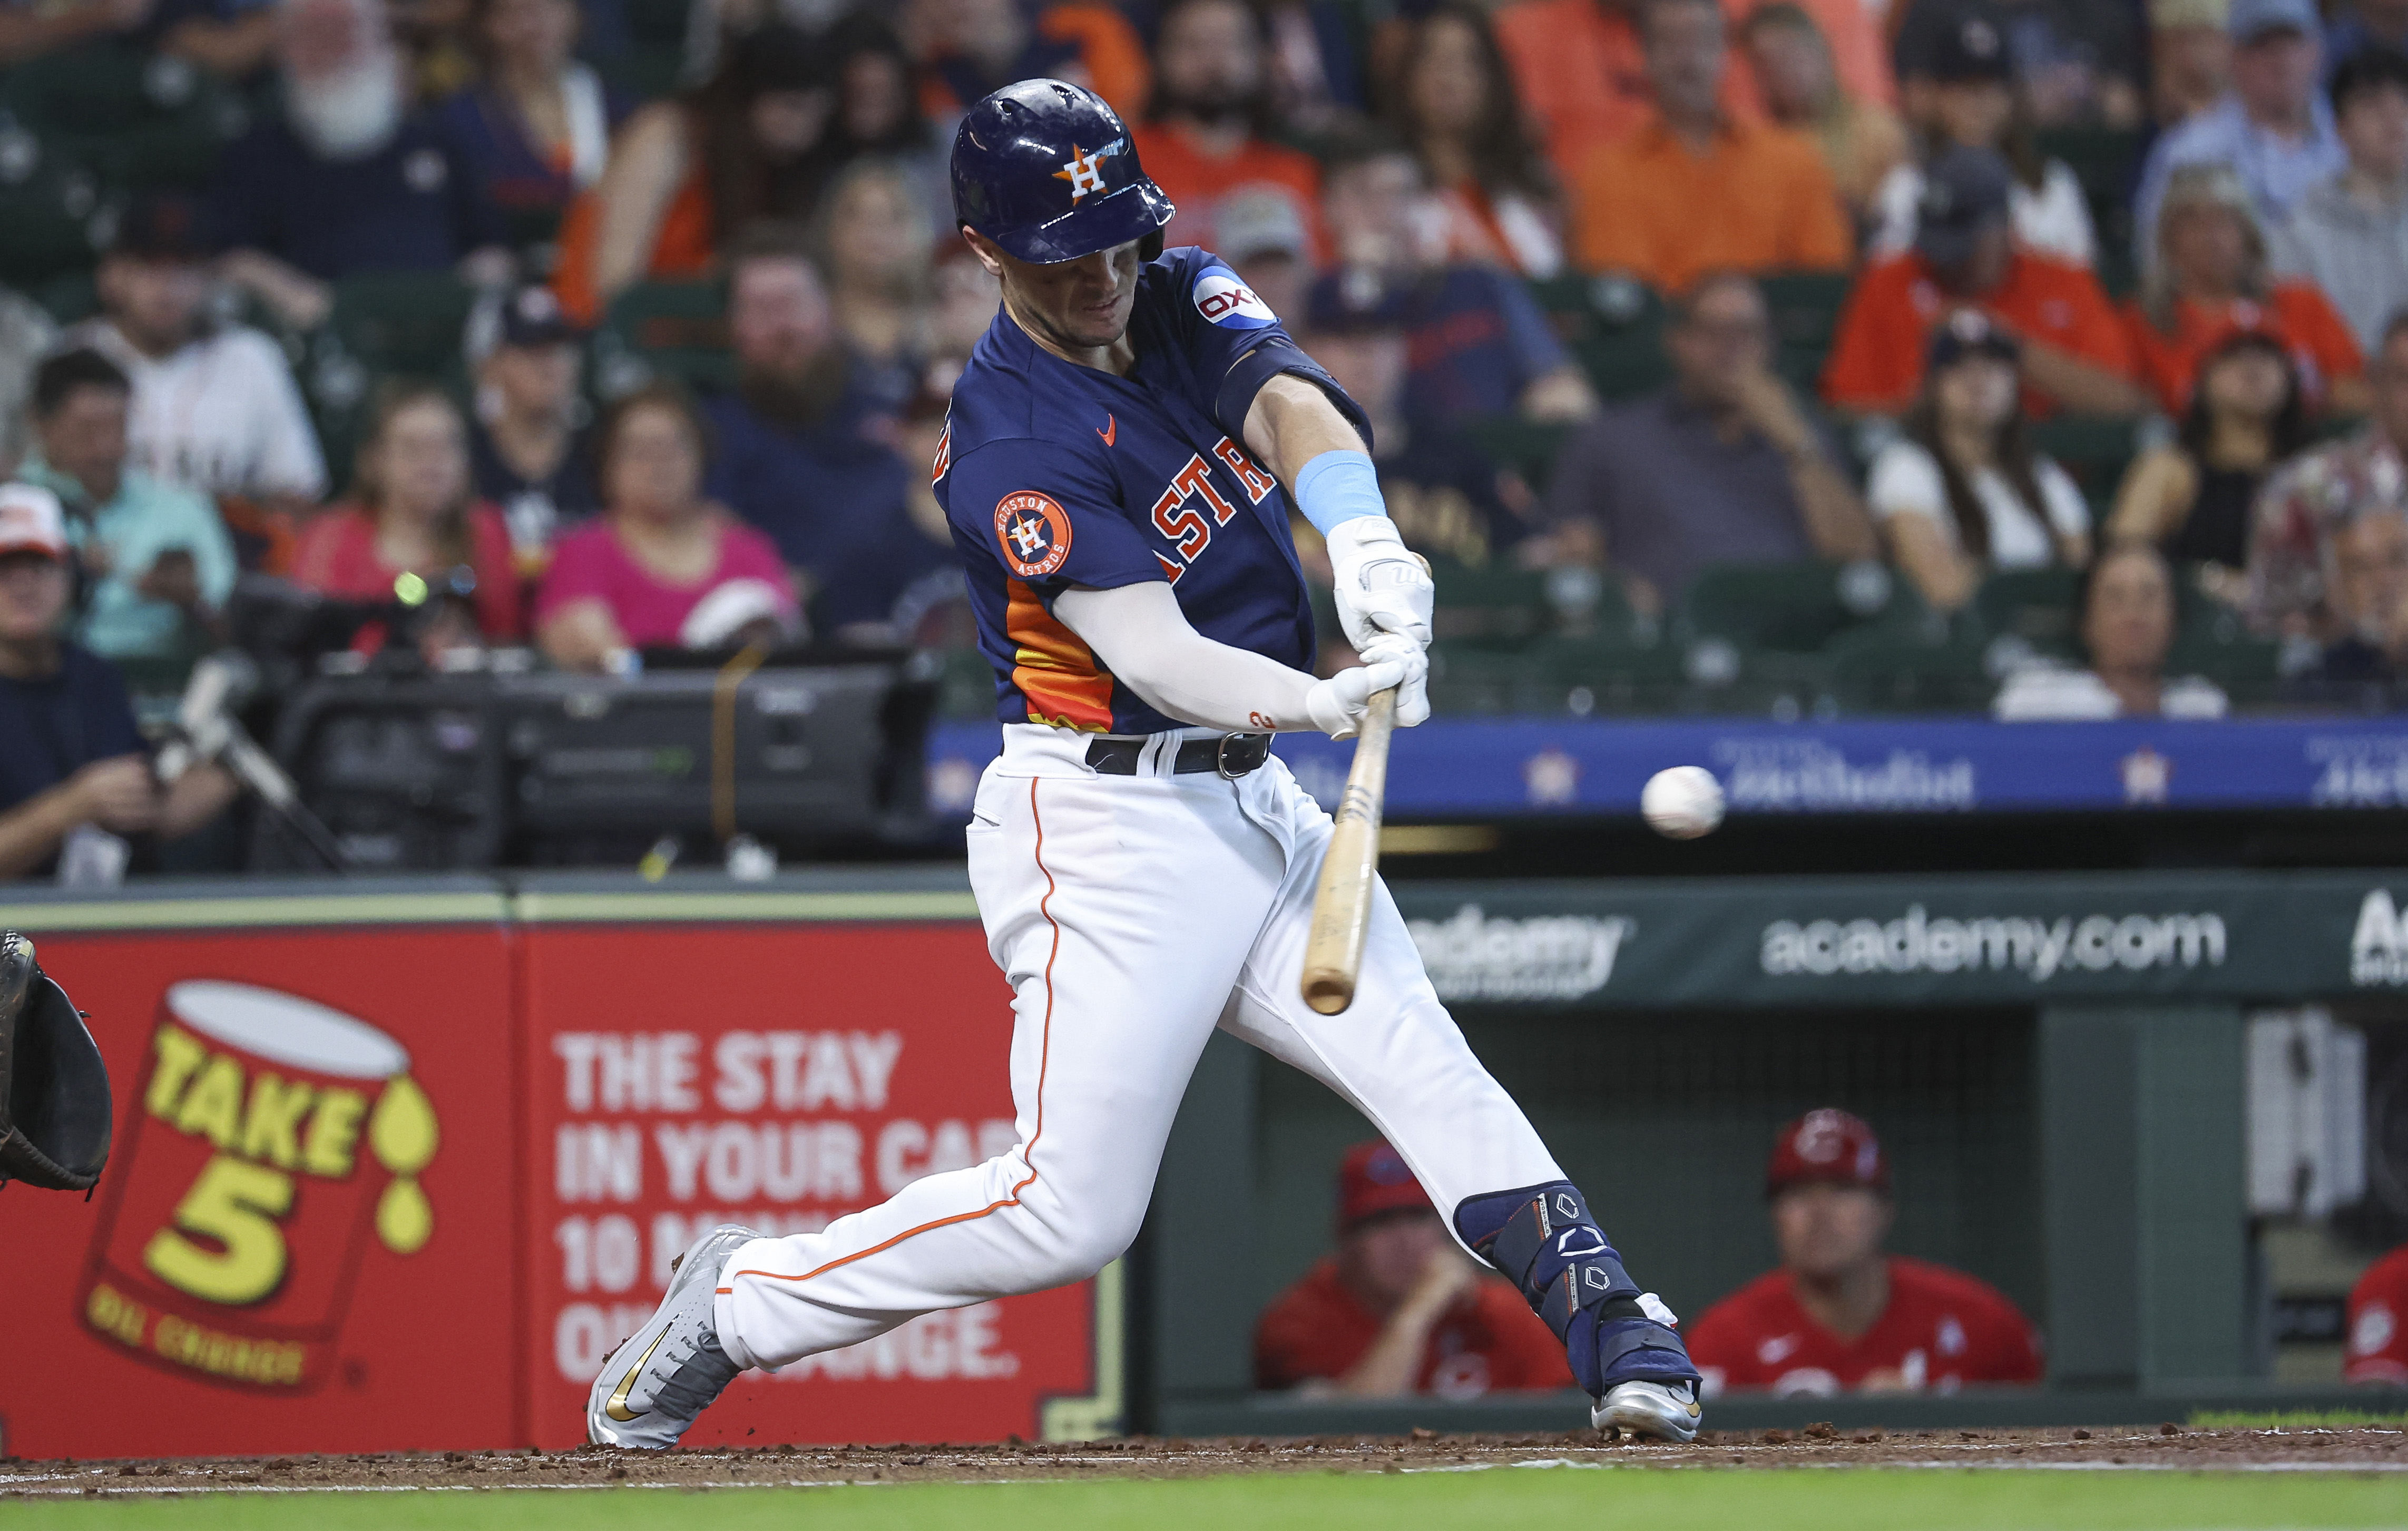 India homers in 10-3 win over Astros; Reds extend longest active